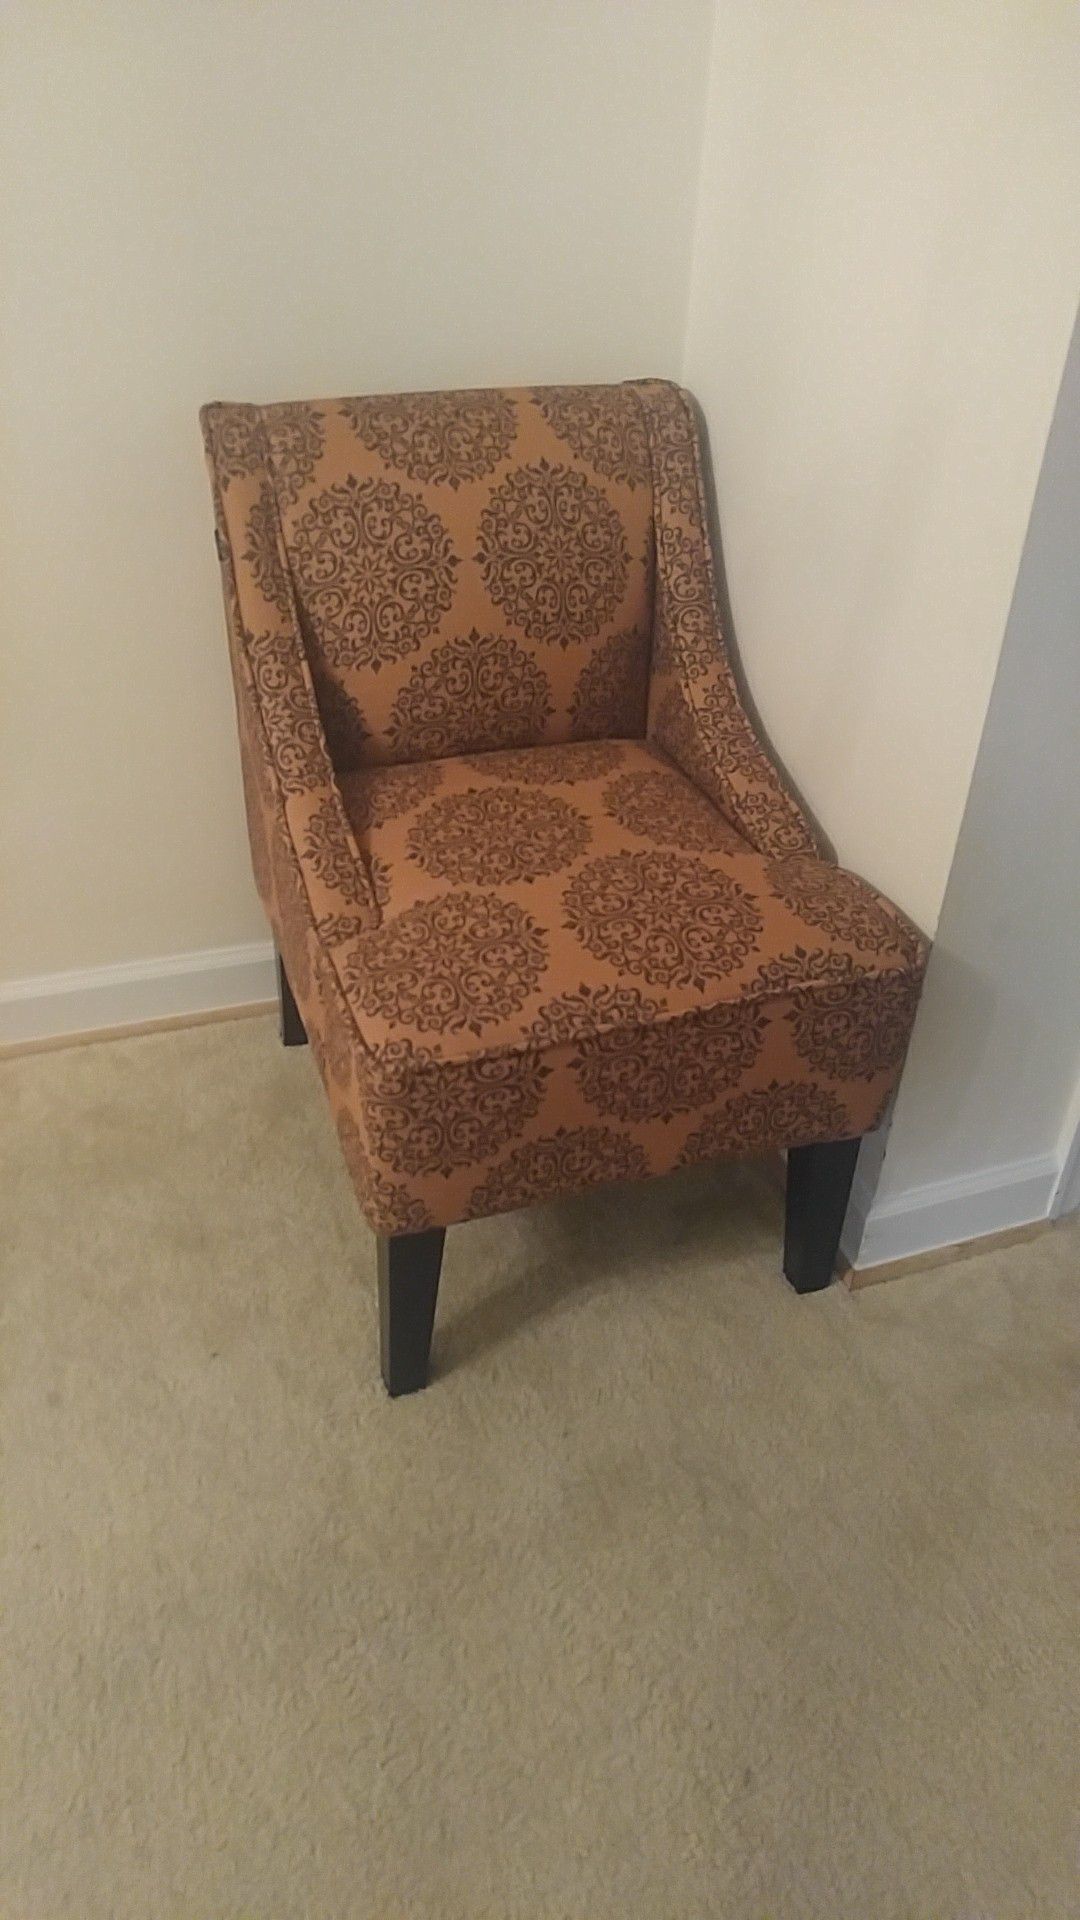 Dwell Home Marlow Accent Chair with Gabrielle Upholstery in Spice $120